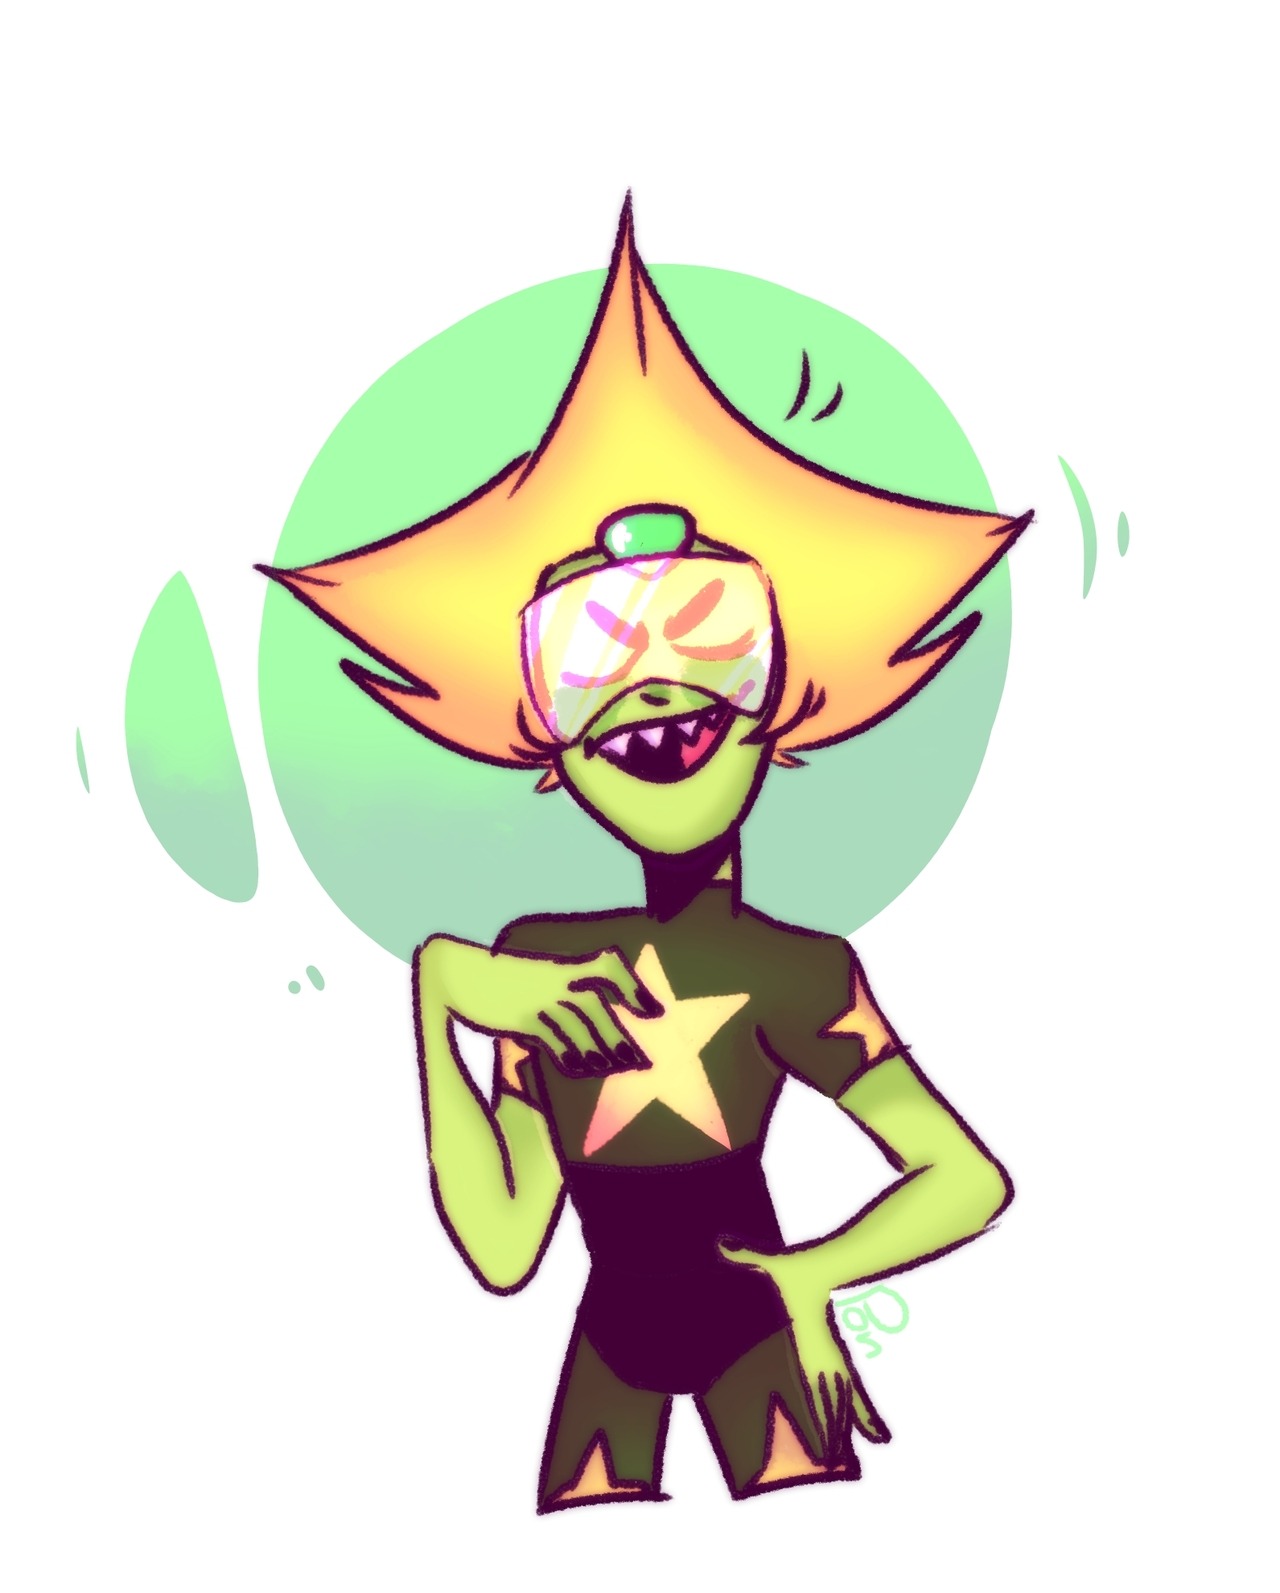 I dared myself to redesign peridots reformation ahhhh im so excited to see her and lapis again!!!